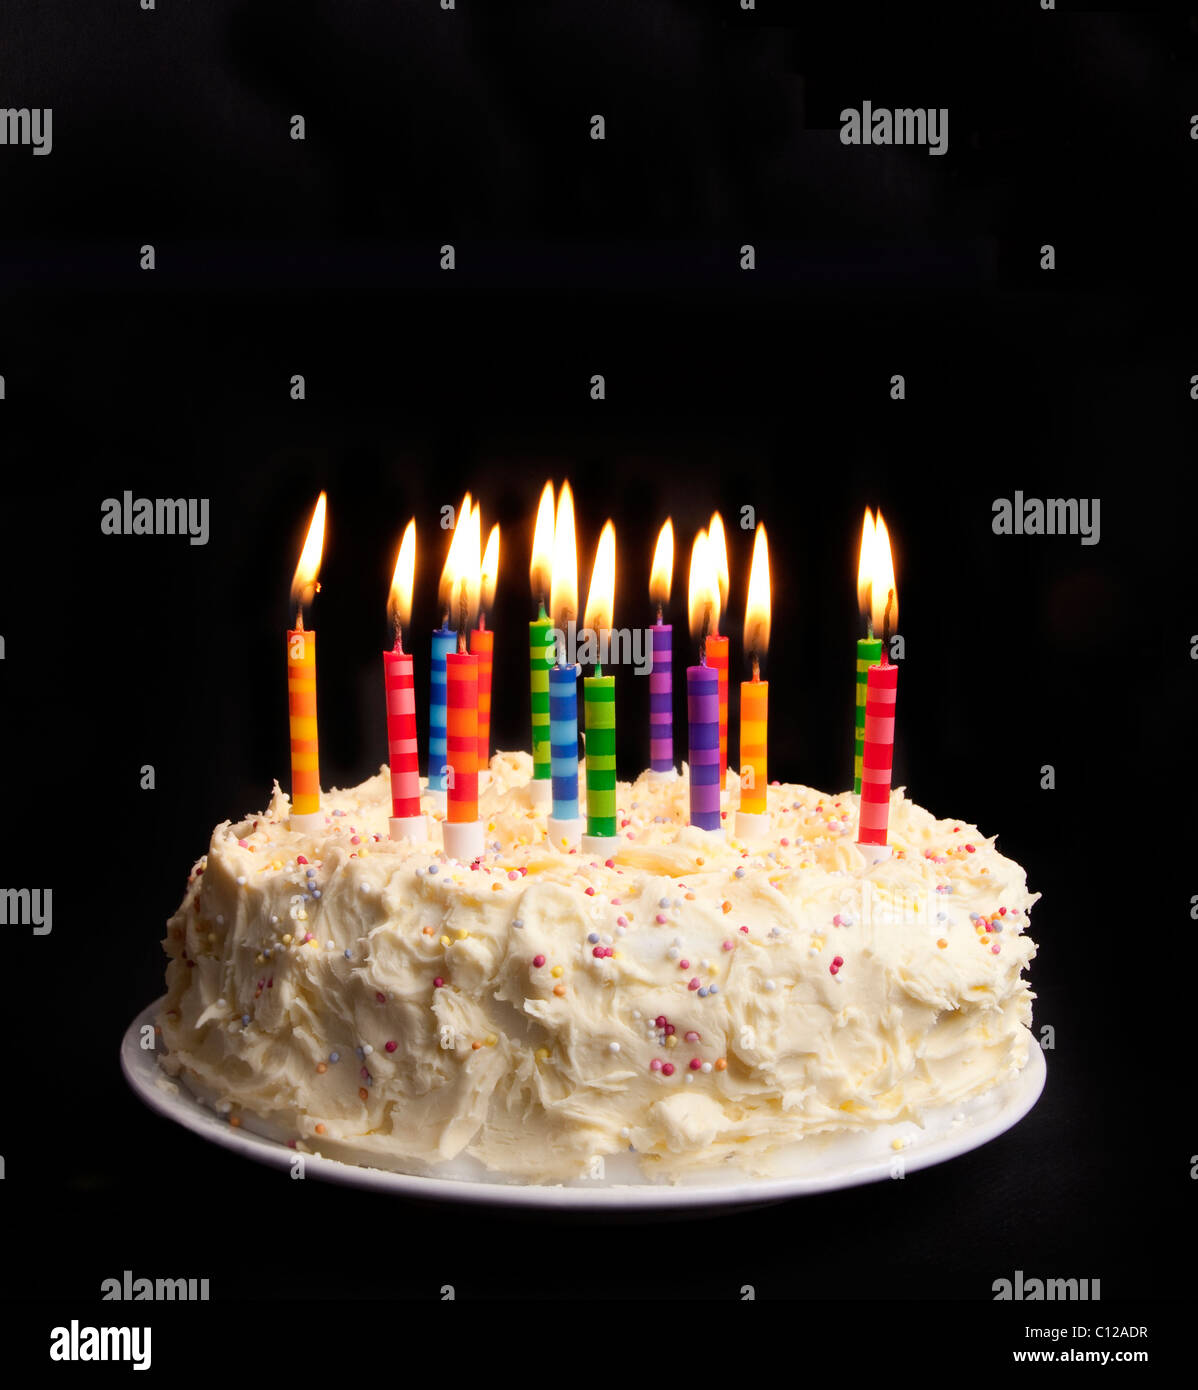 cake on a black background with candles alight Stock Photo